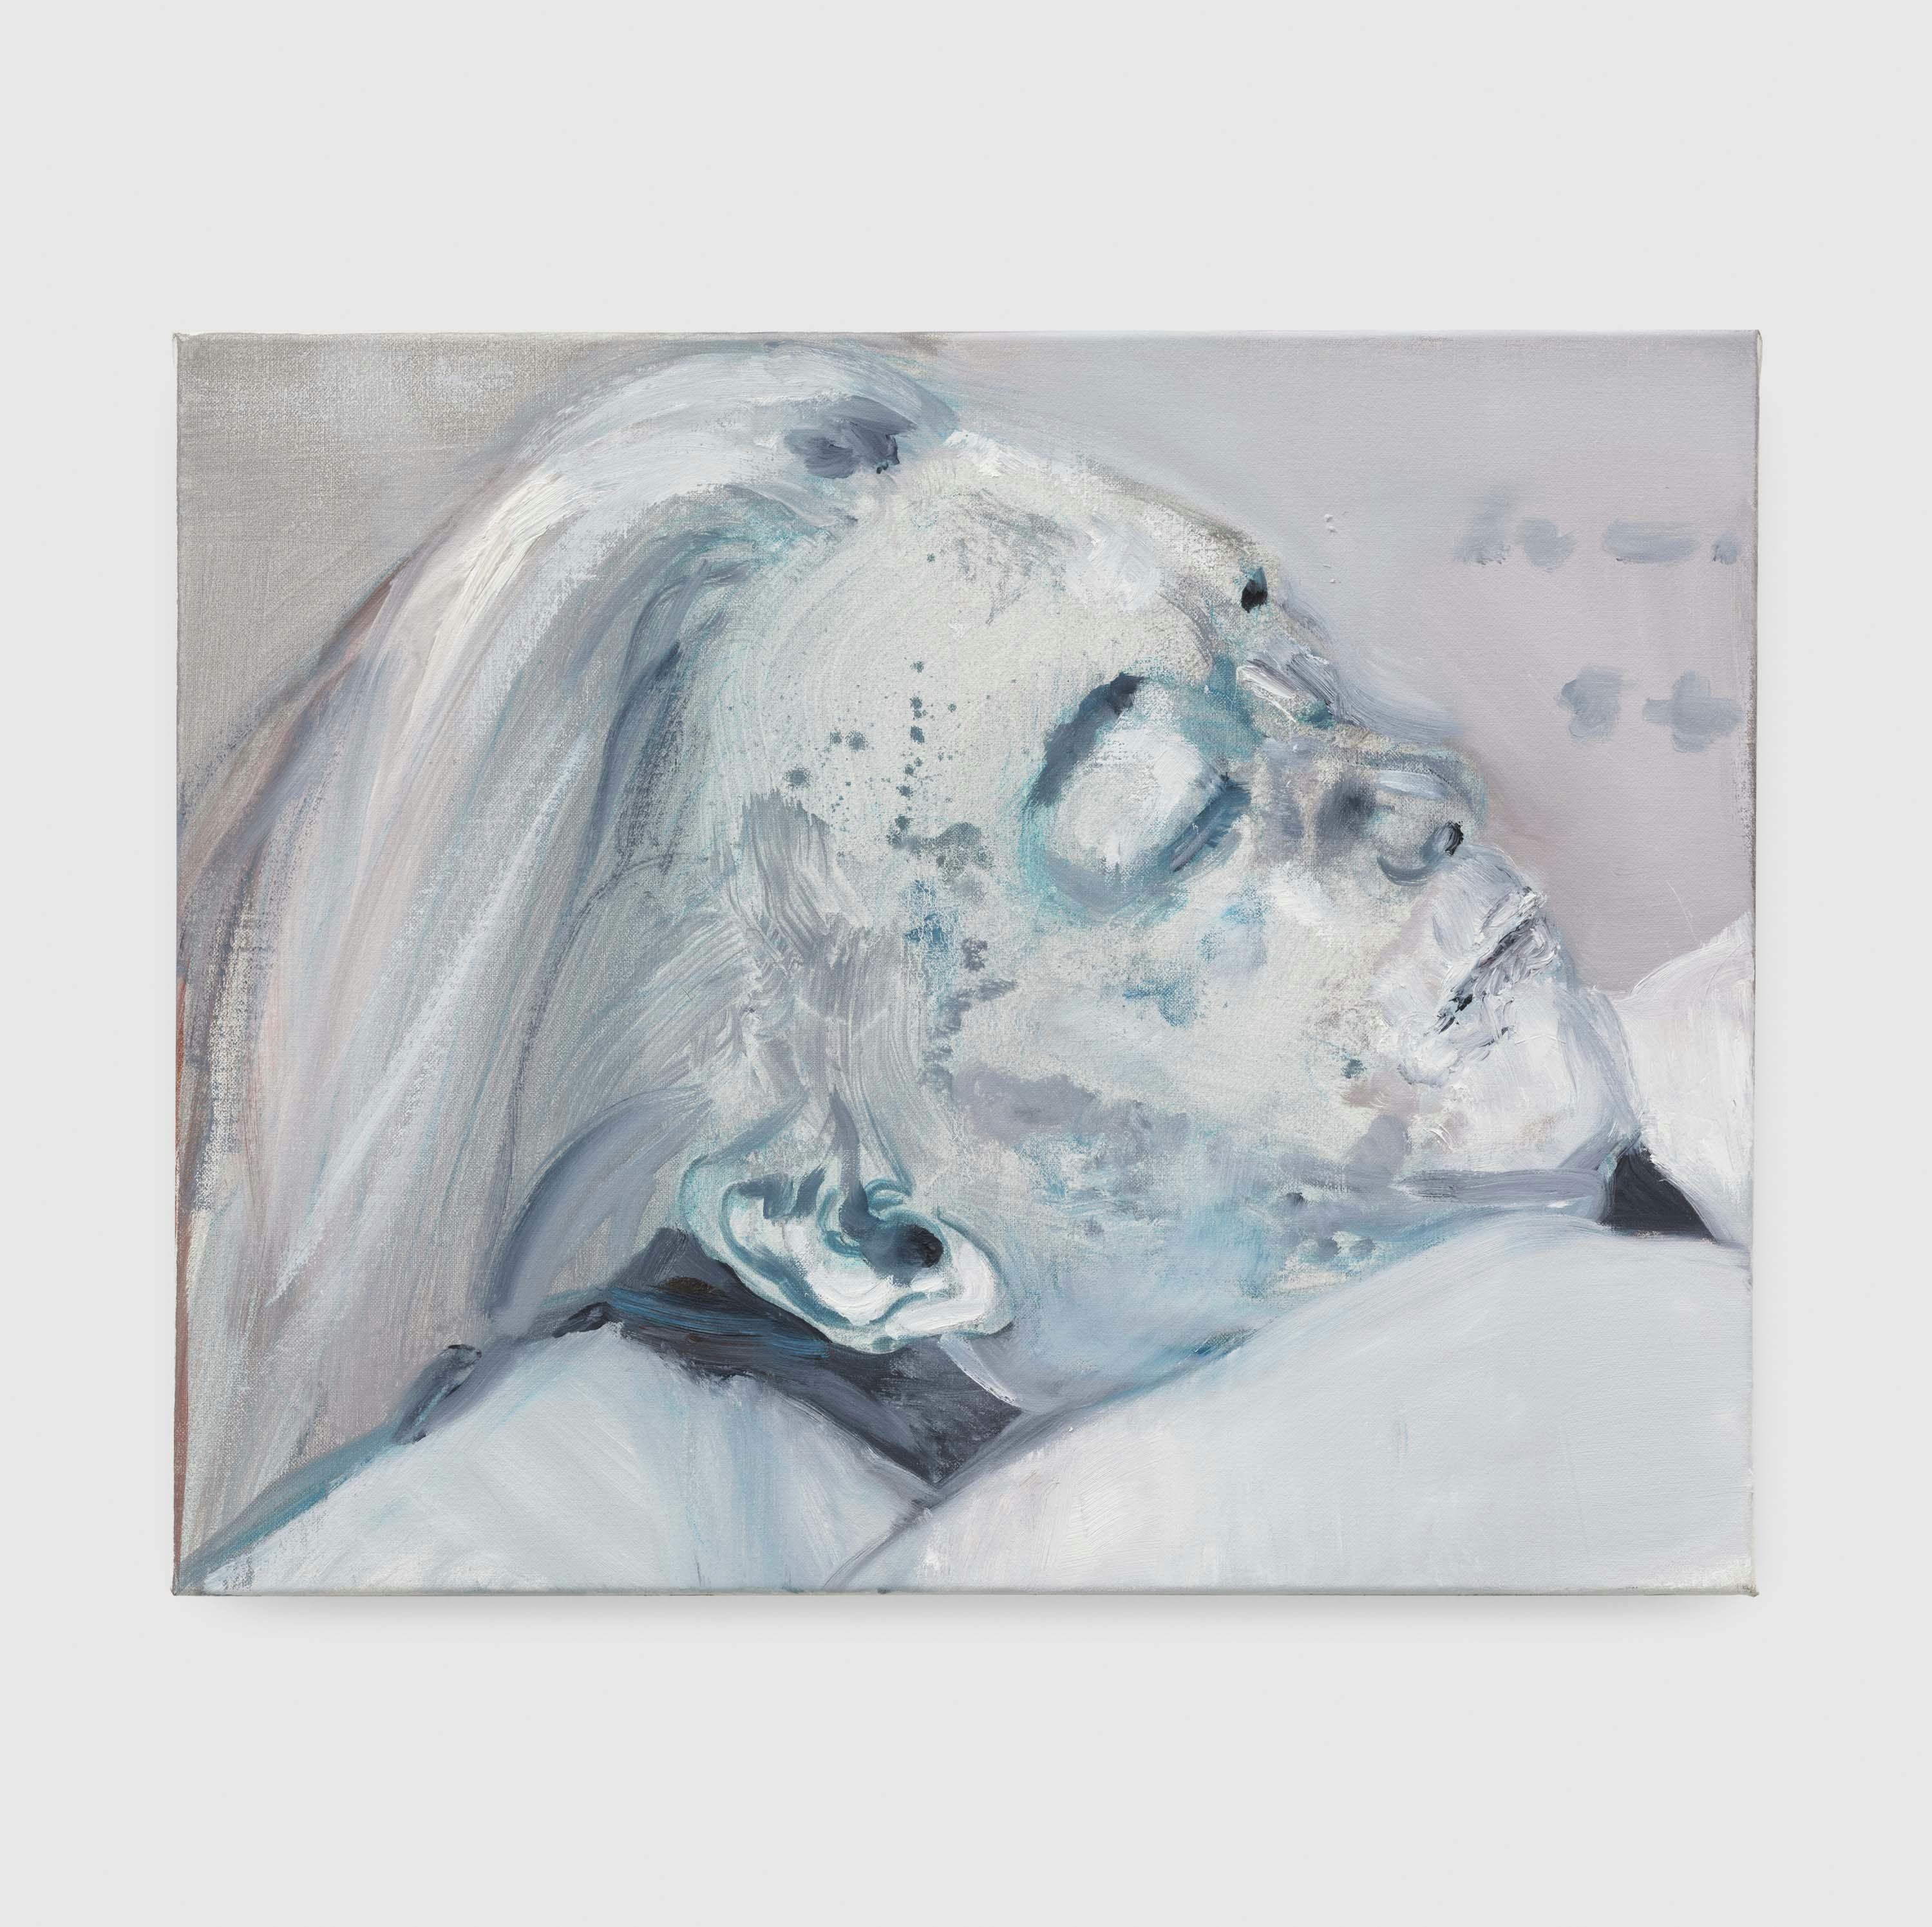 A painting by Marlene Dumas, titled Dead Marilyn, dated 2008.